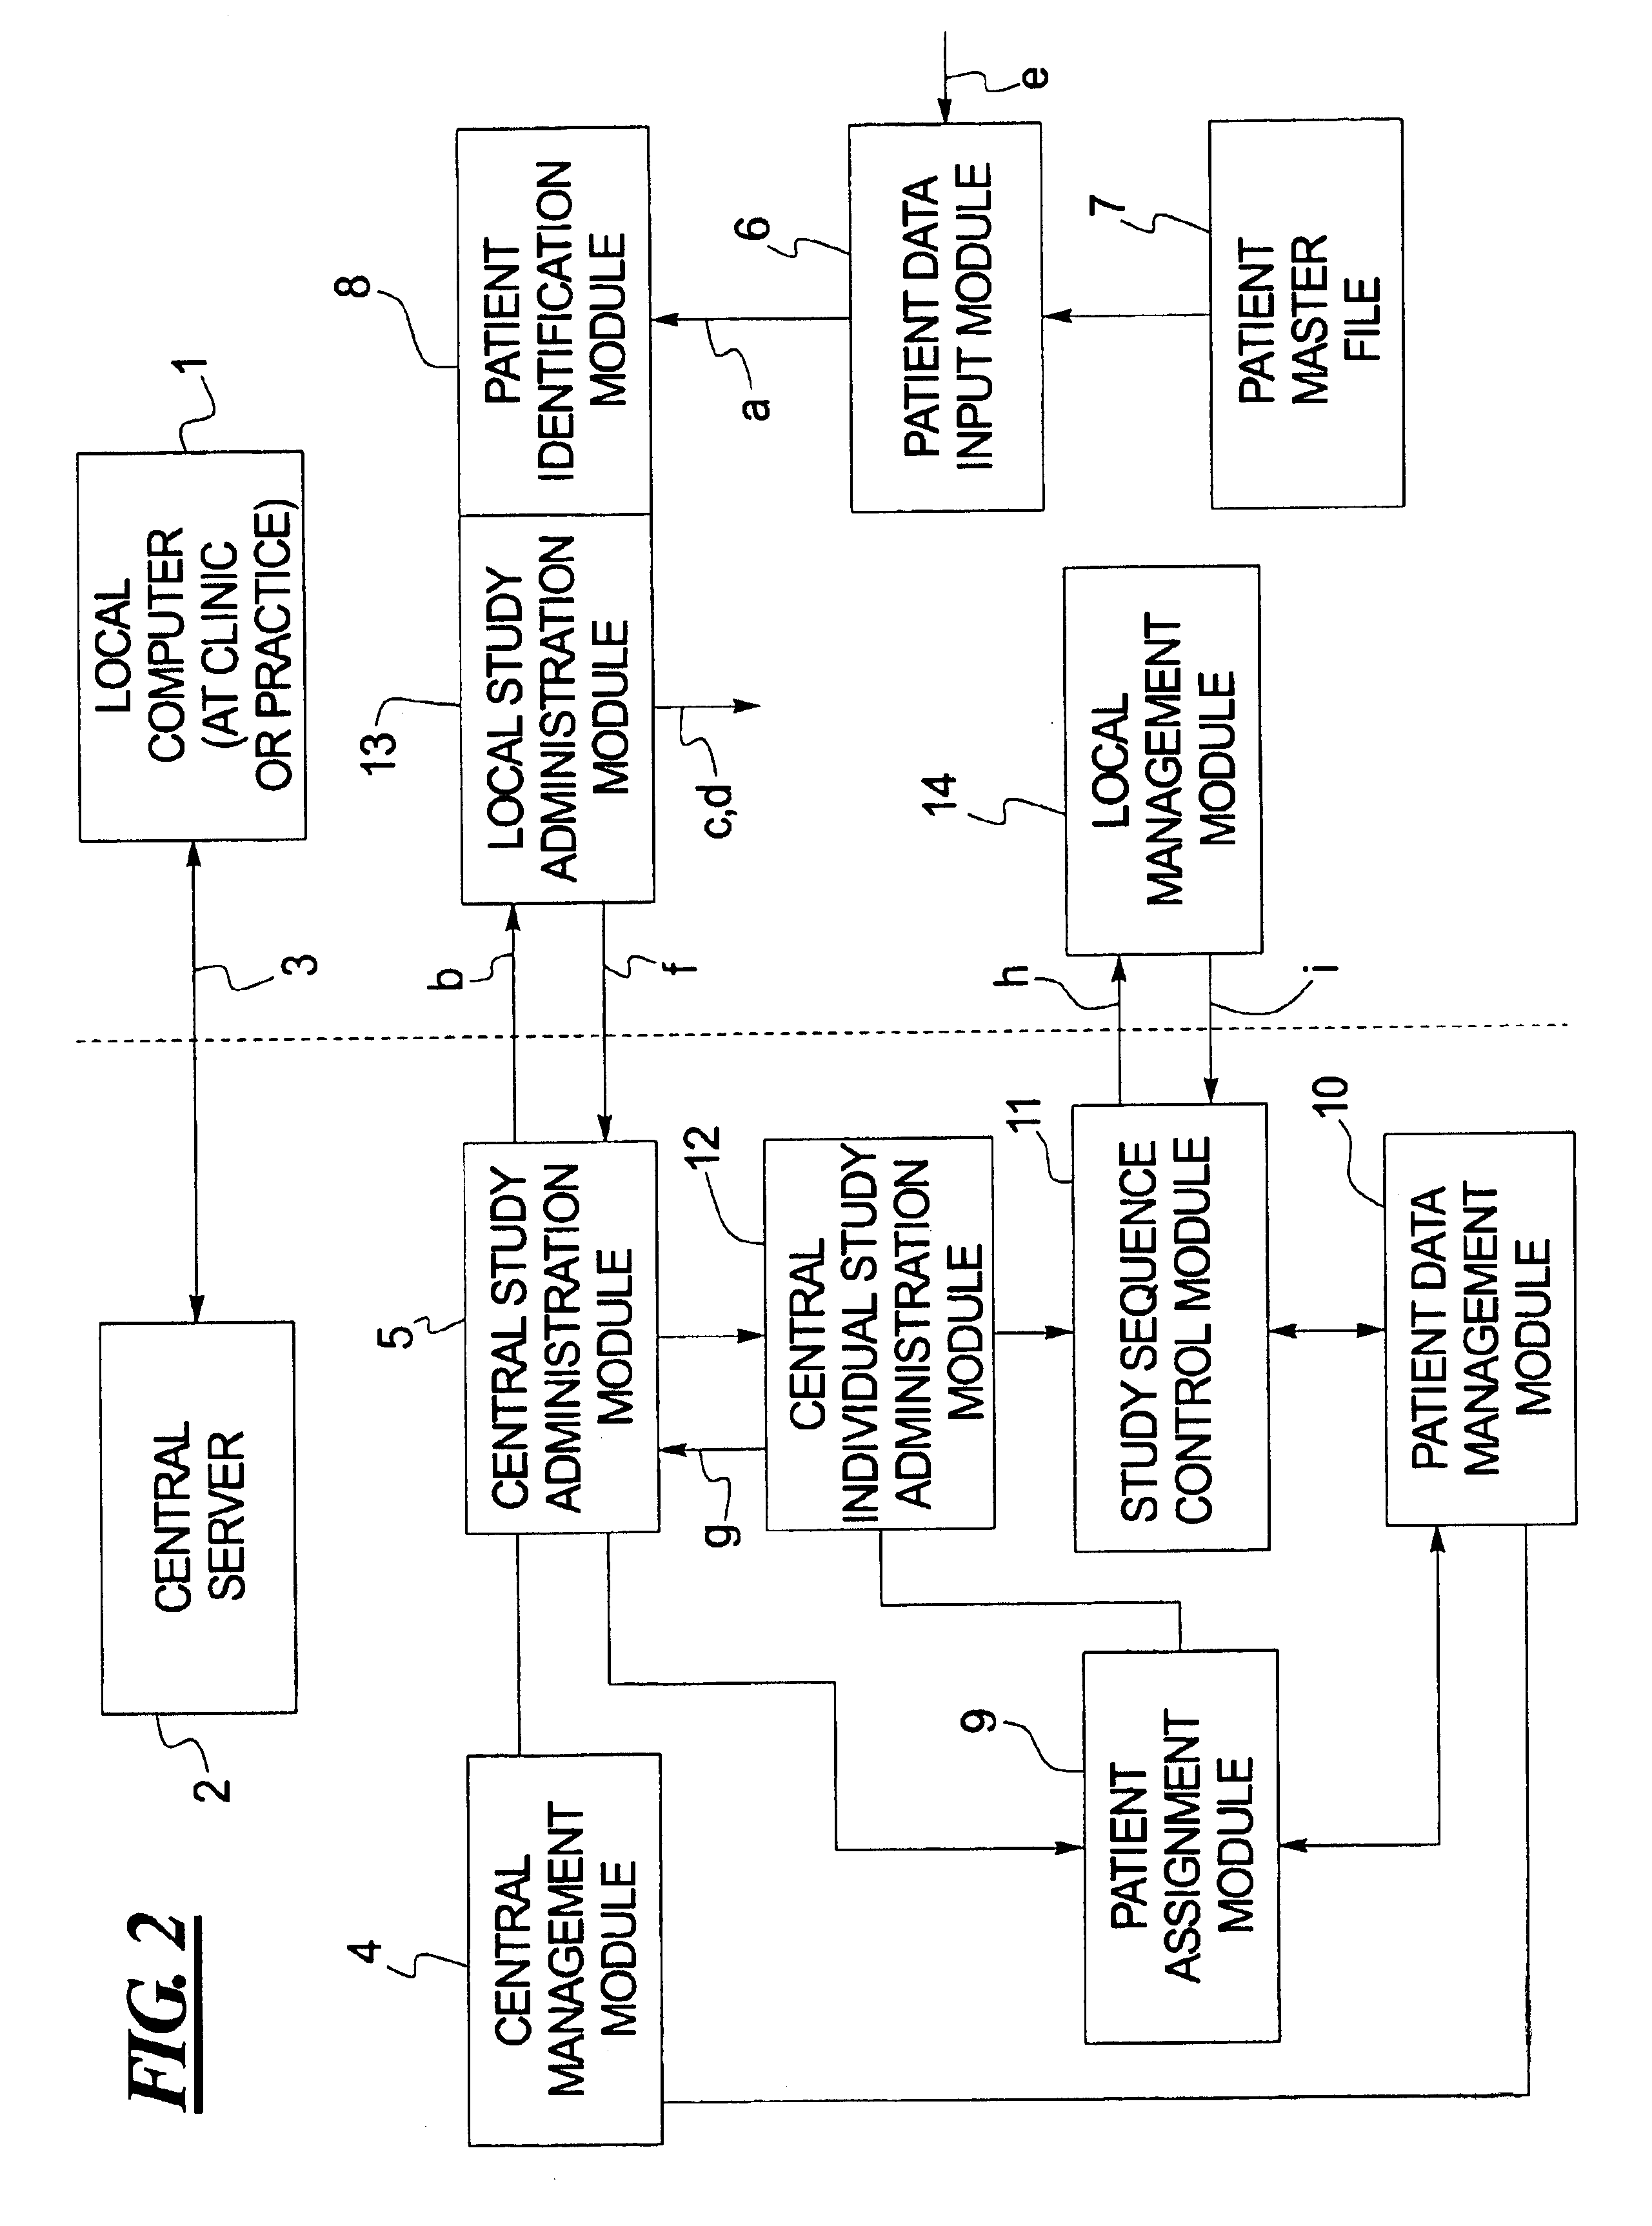 Computerized system for conducting medical studies